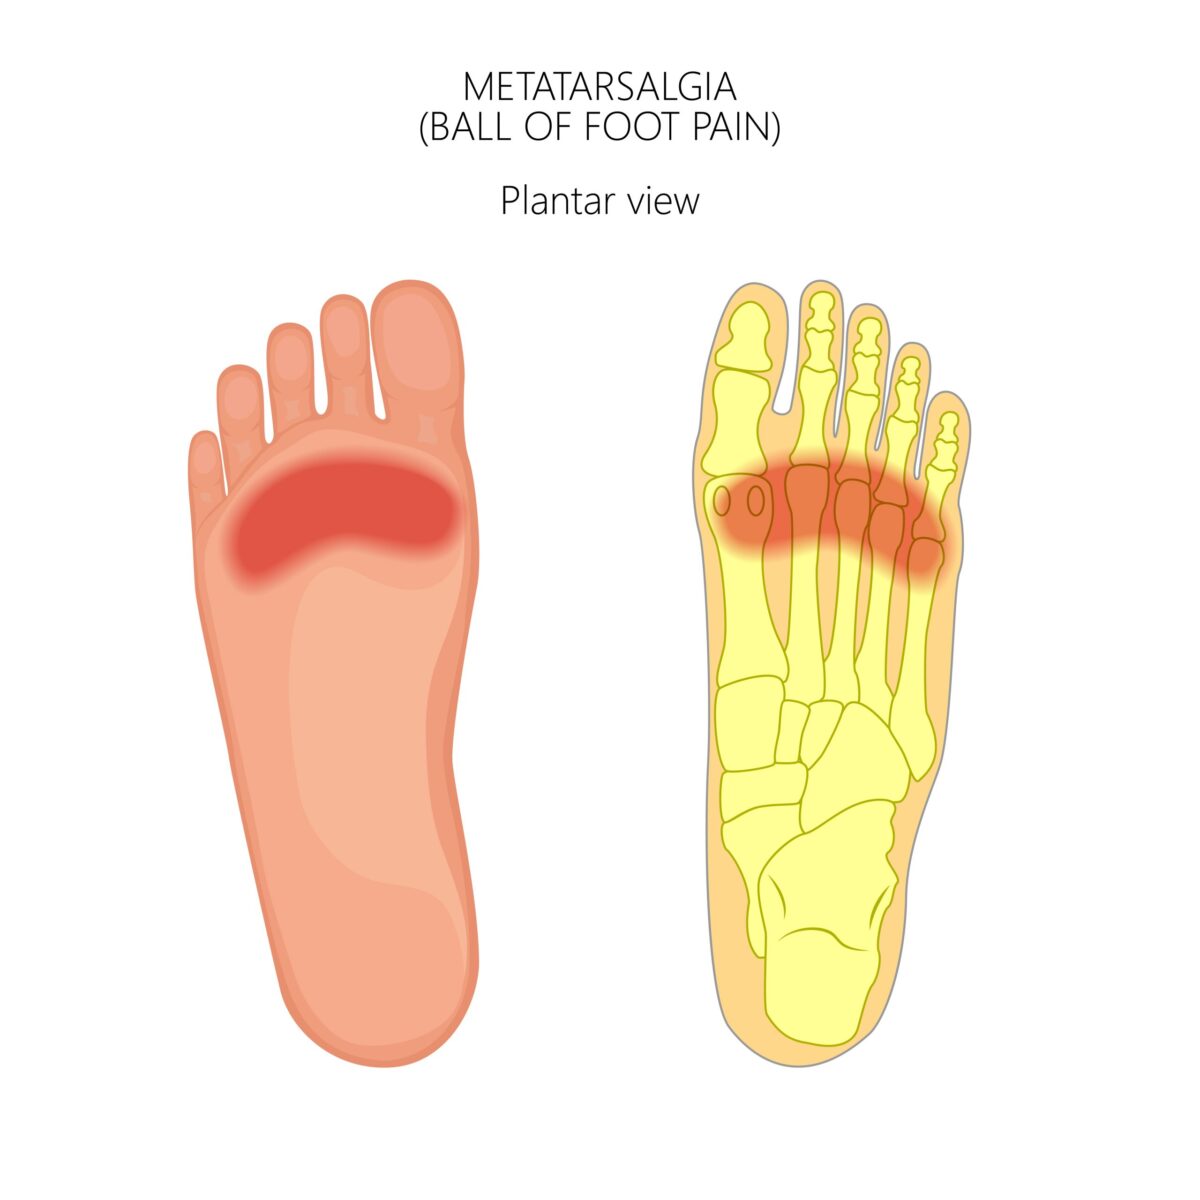 Diabetic foot: what is it, symptoms and treatment | Top Doctors